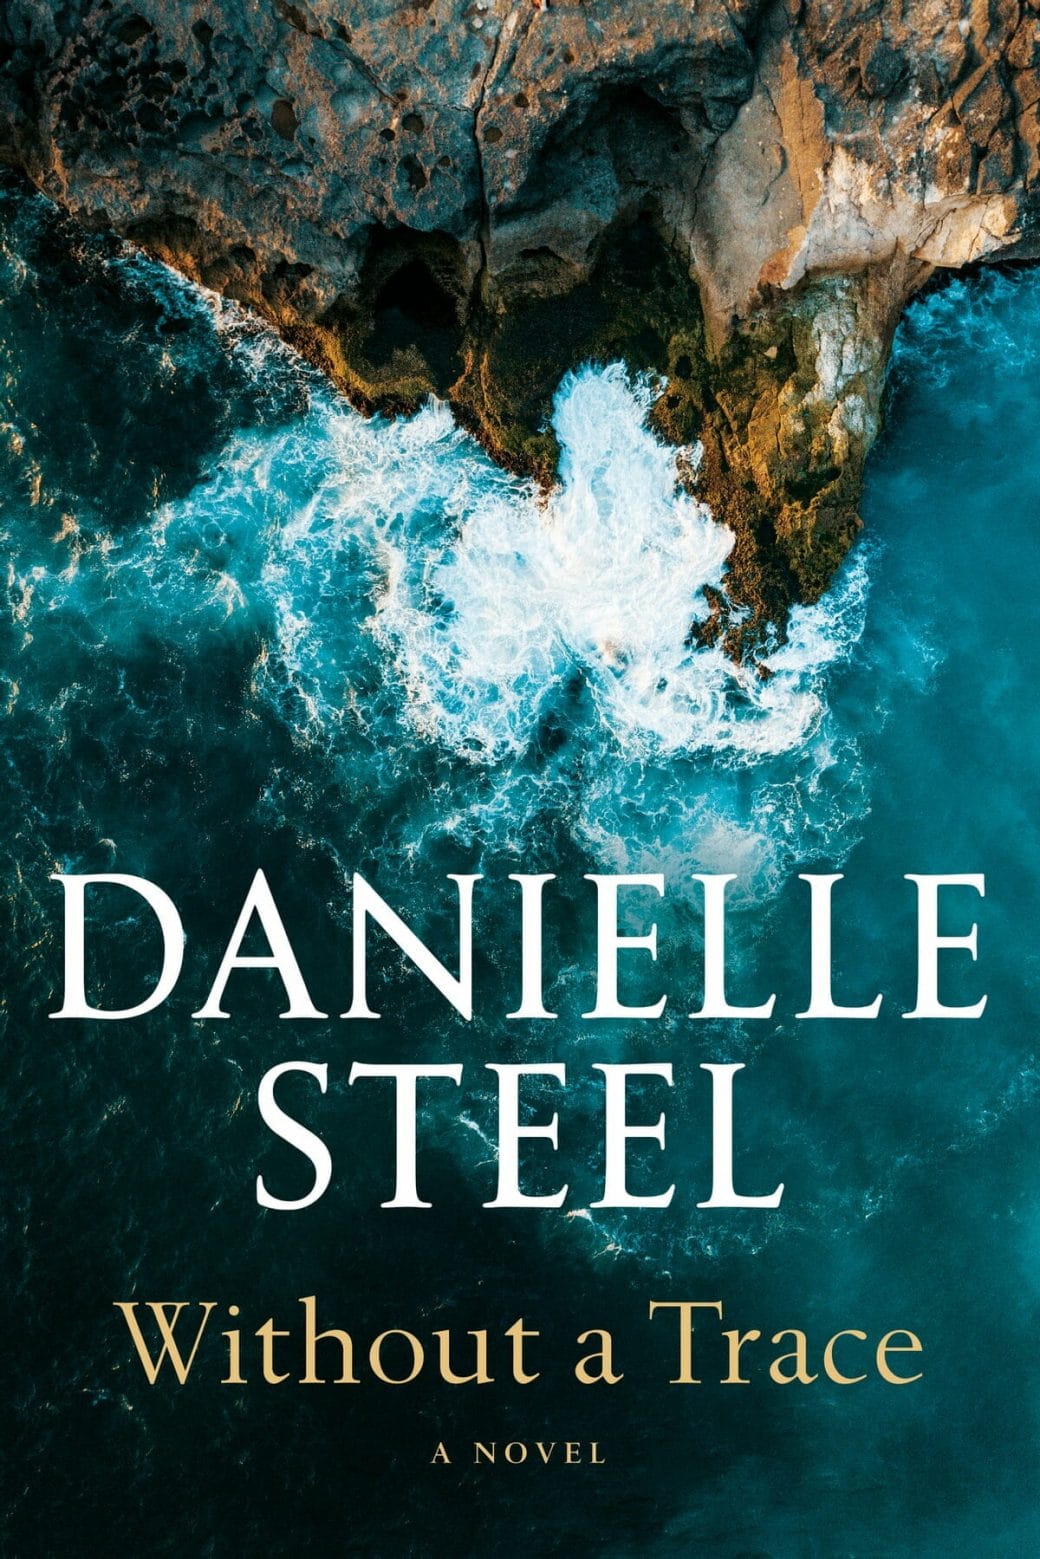 Danielle Steel New Book Worthy Opponents Out Now! RD